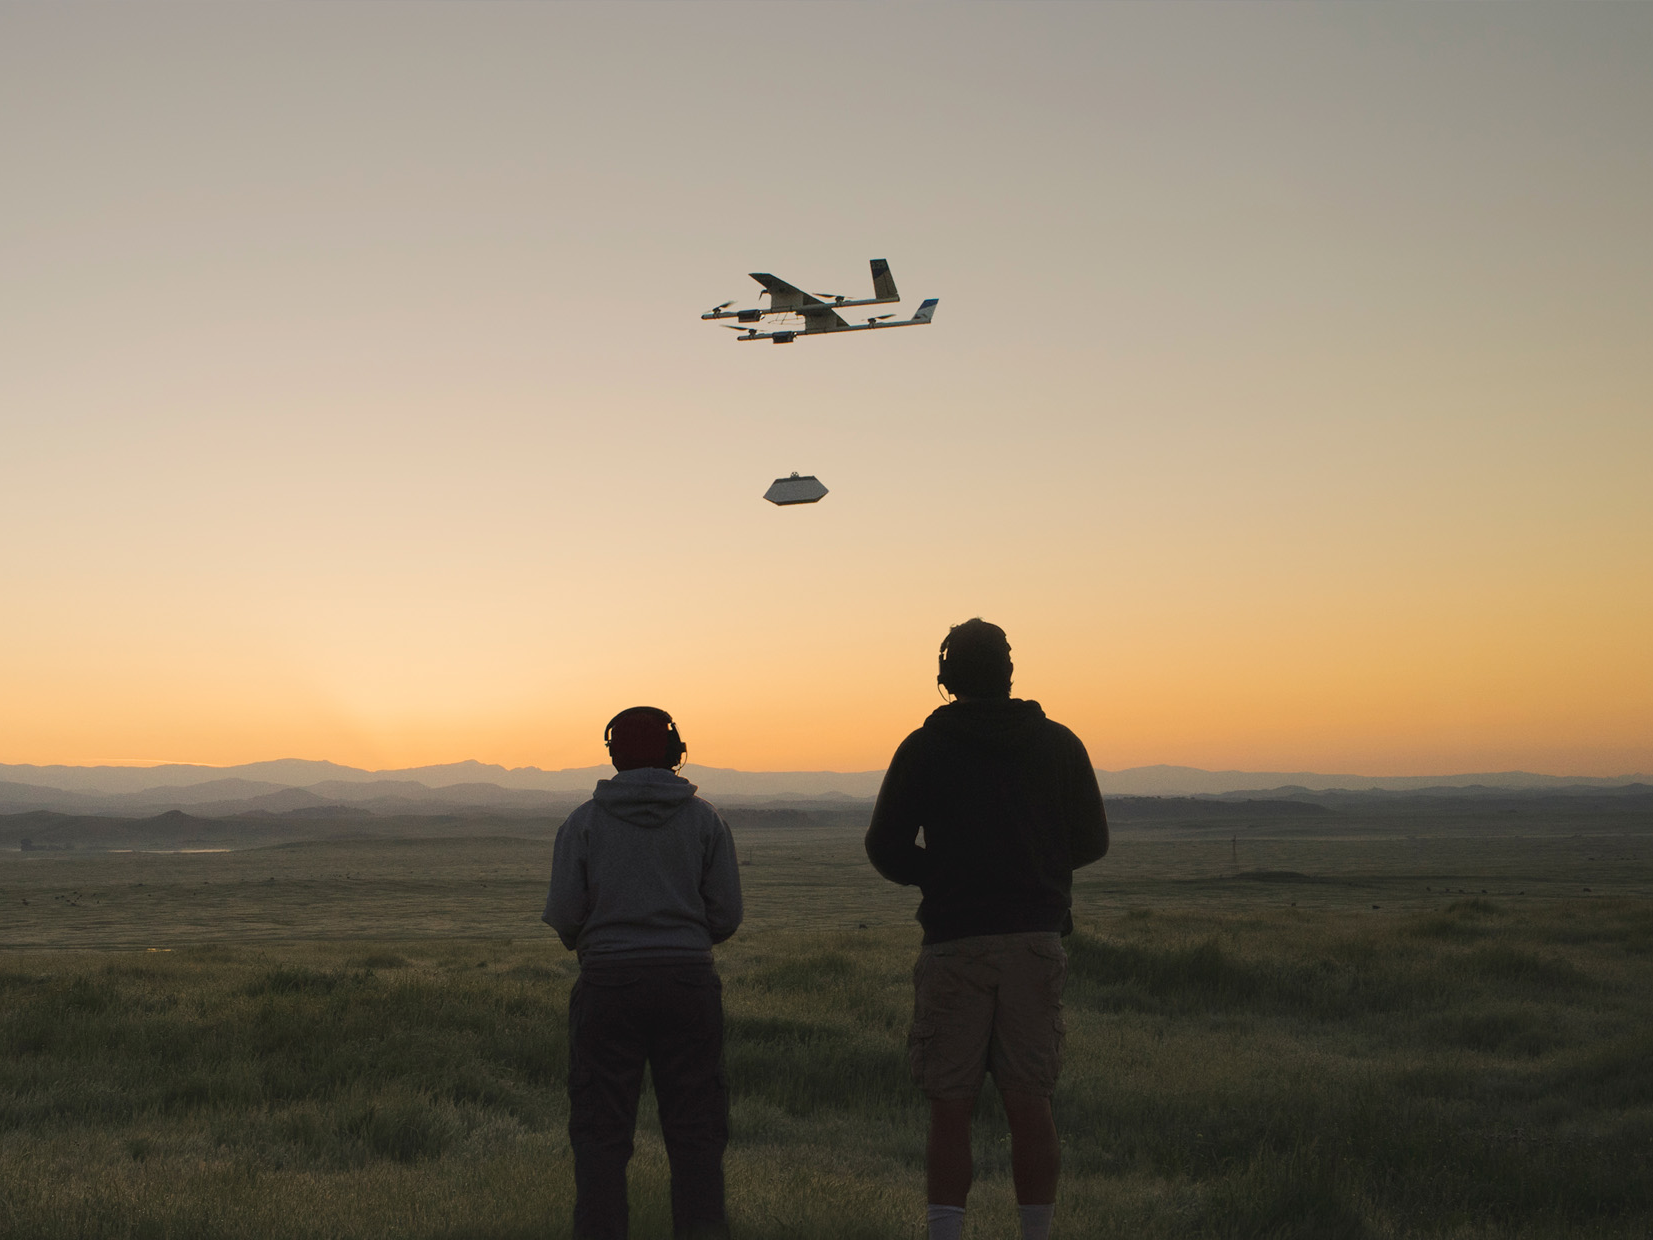 The latest idea from Google's moonshot factory: a service where drones deliver your food for $6